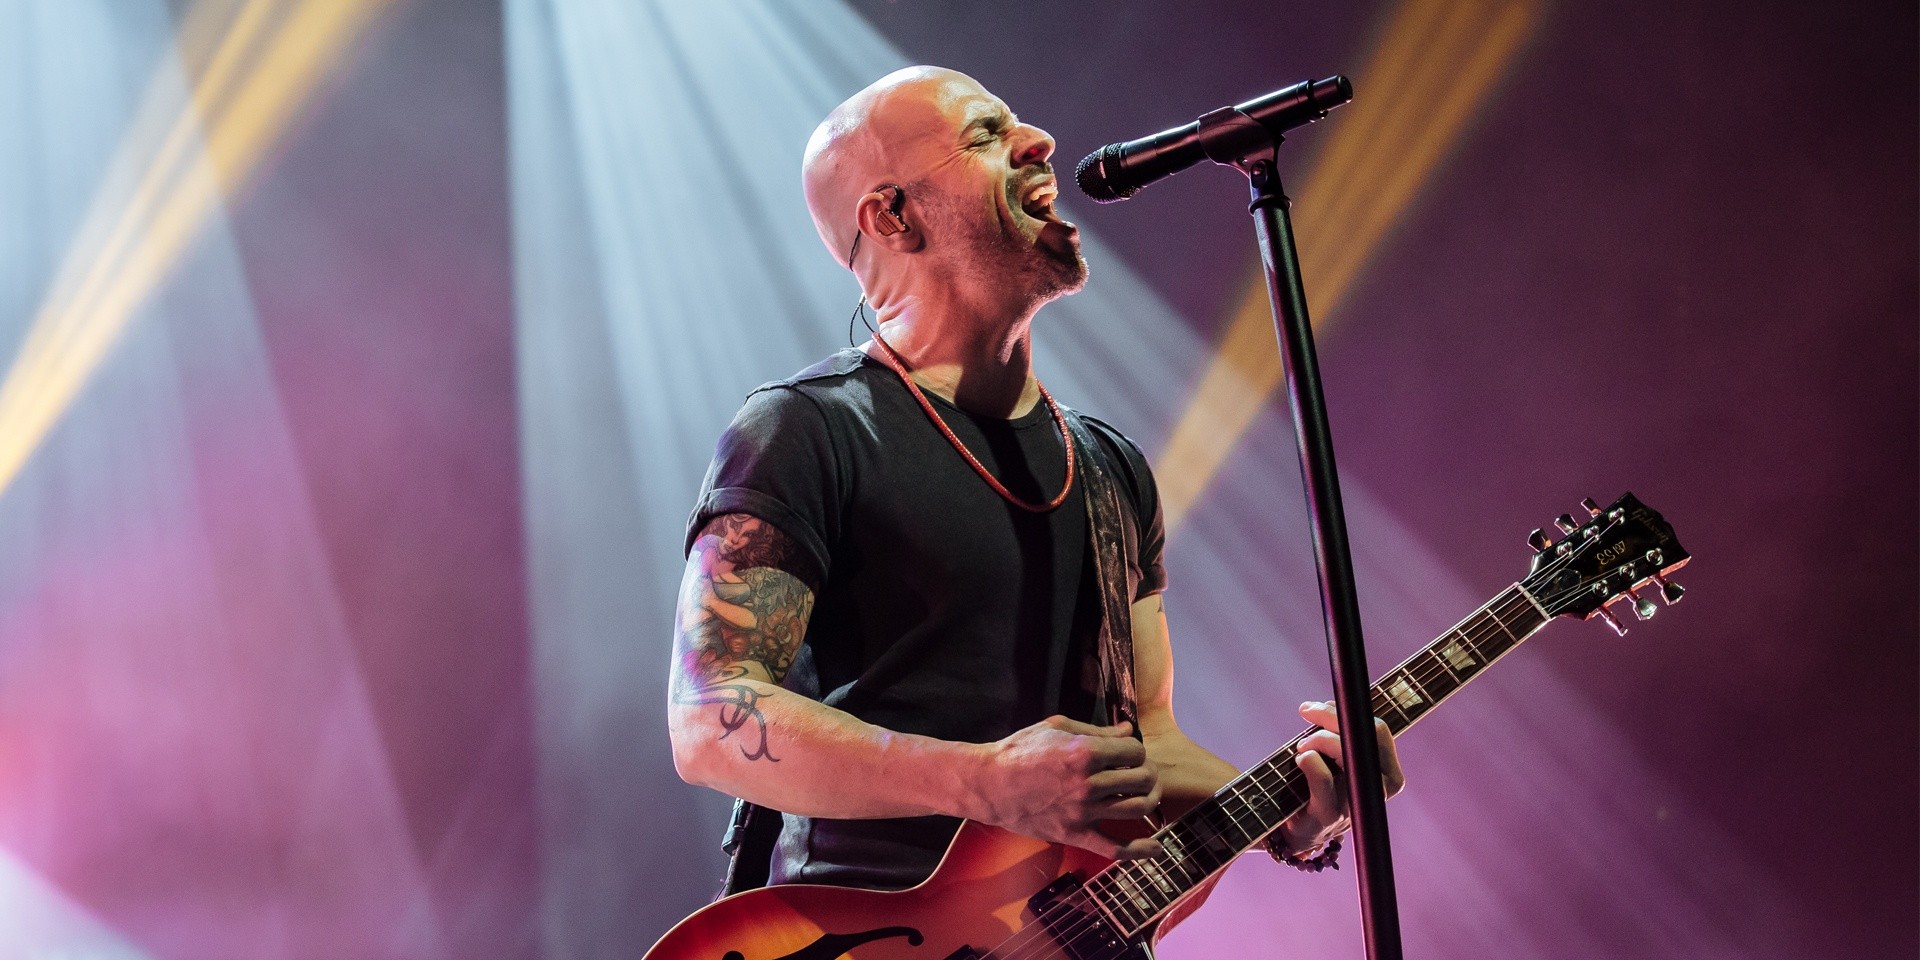 Daughtry chart a future beyond early 2000s rock nostalgia – gig report